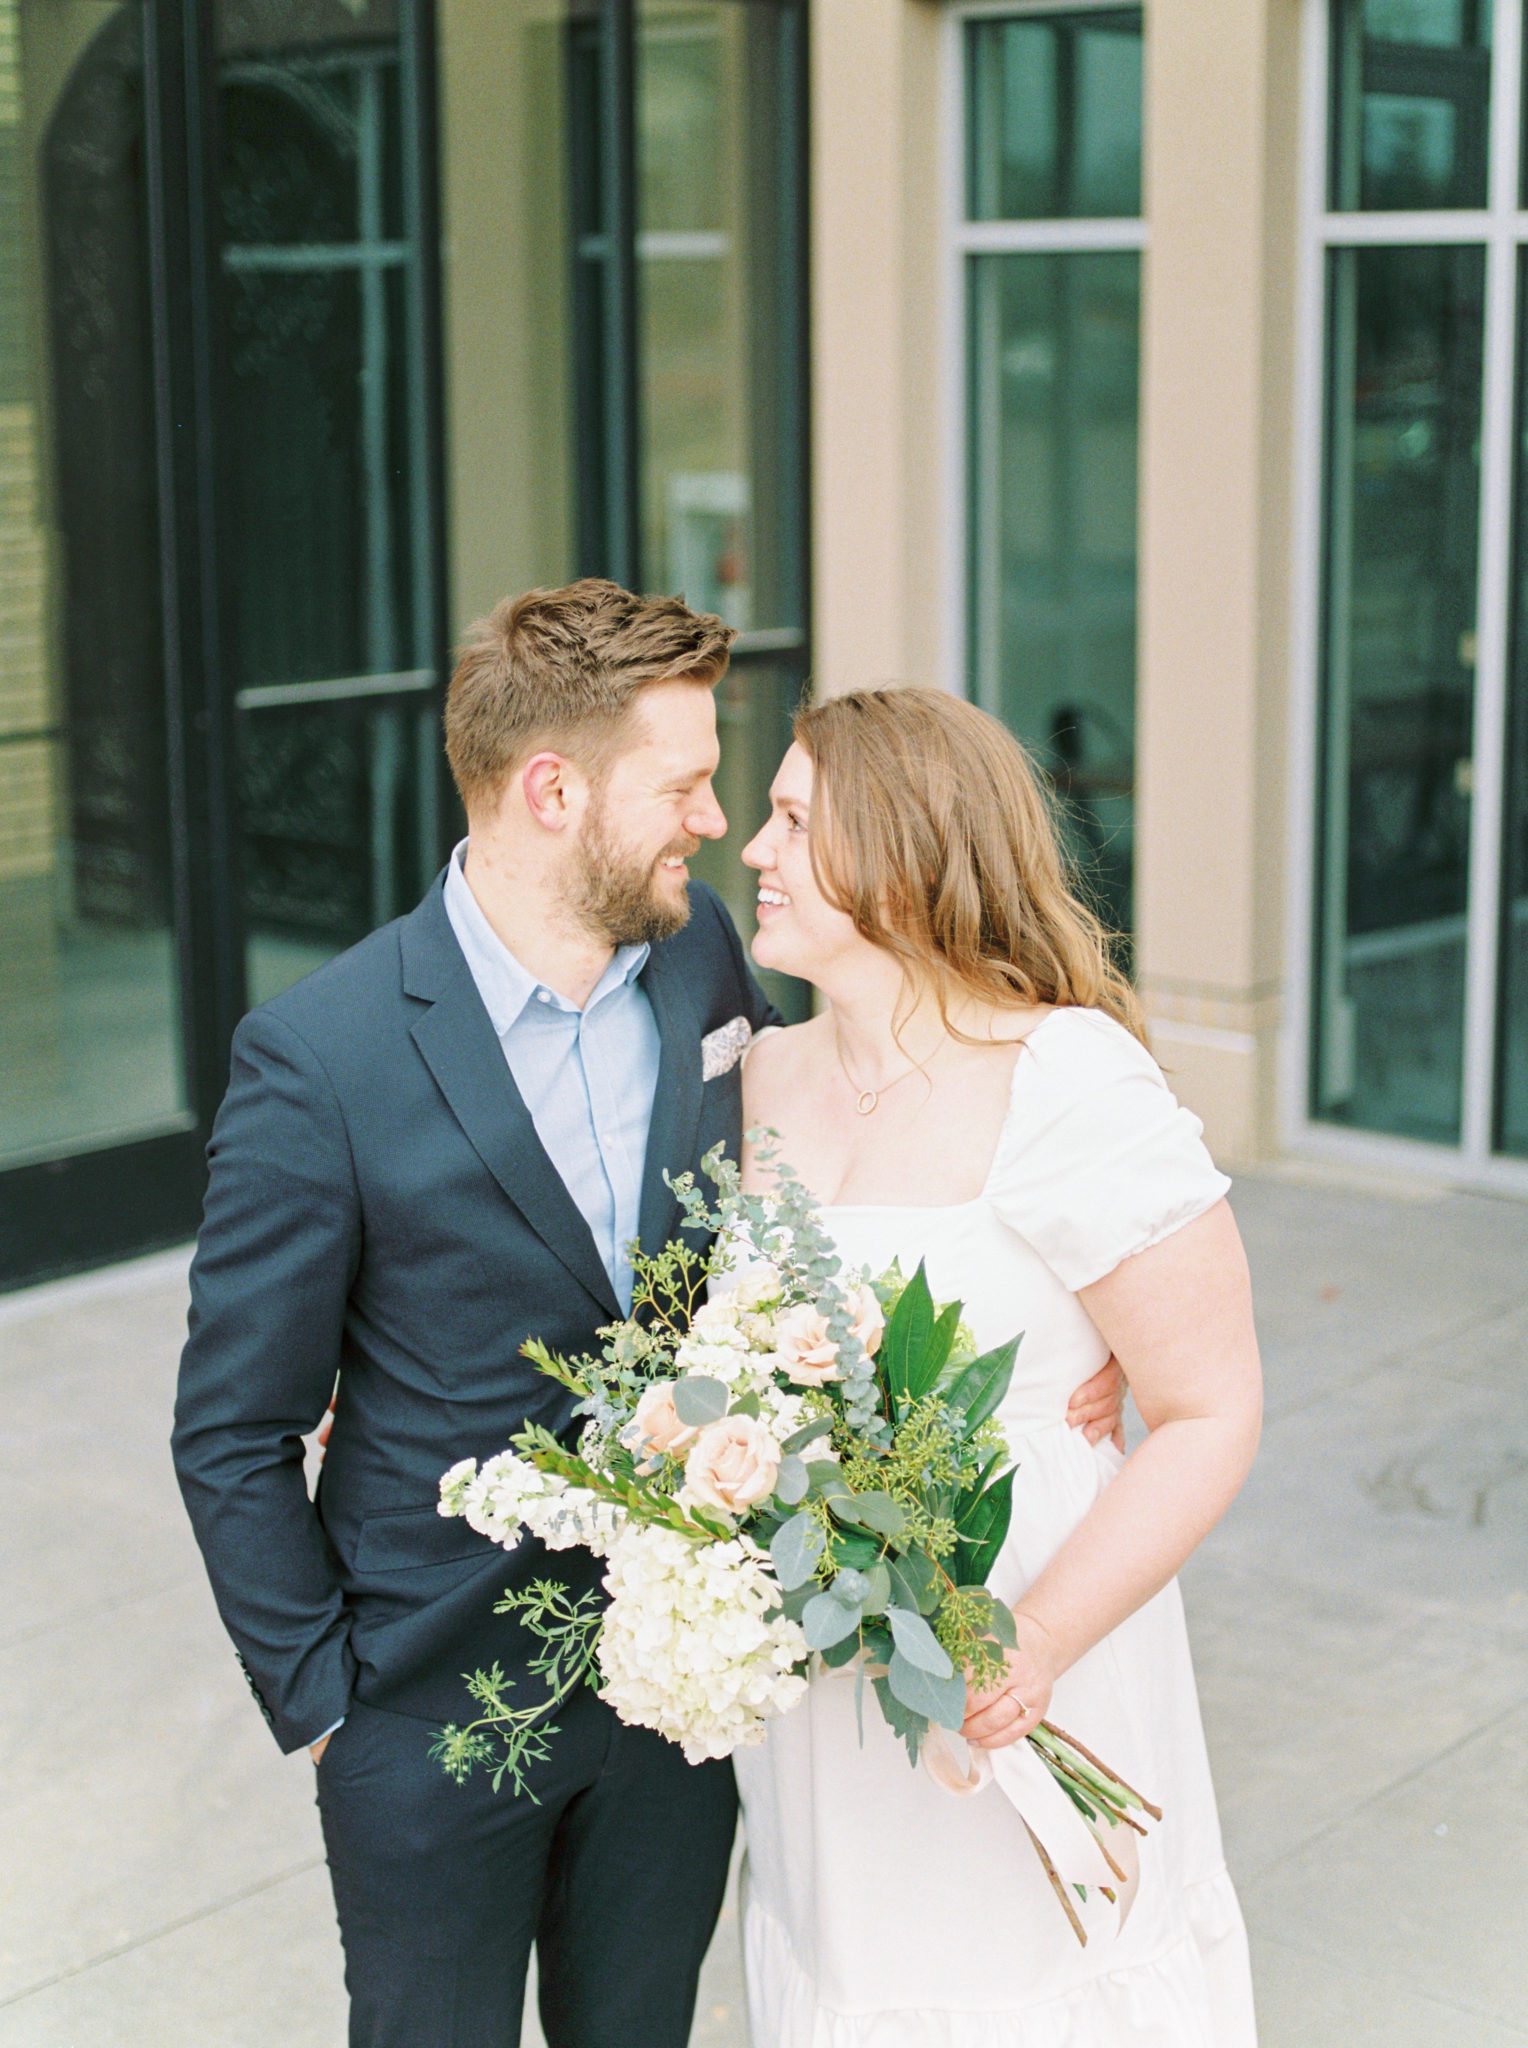 Spring-inspired bouquet of flowers for a romantic Edmonton engagement session